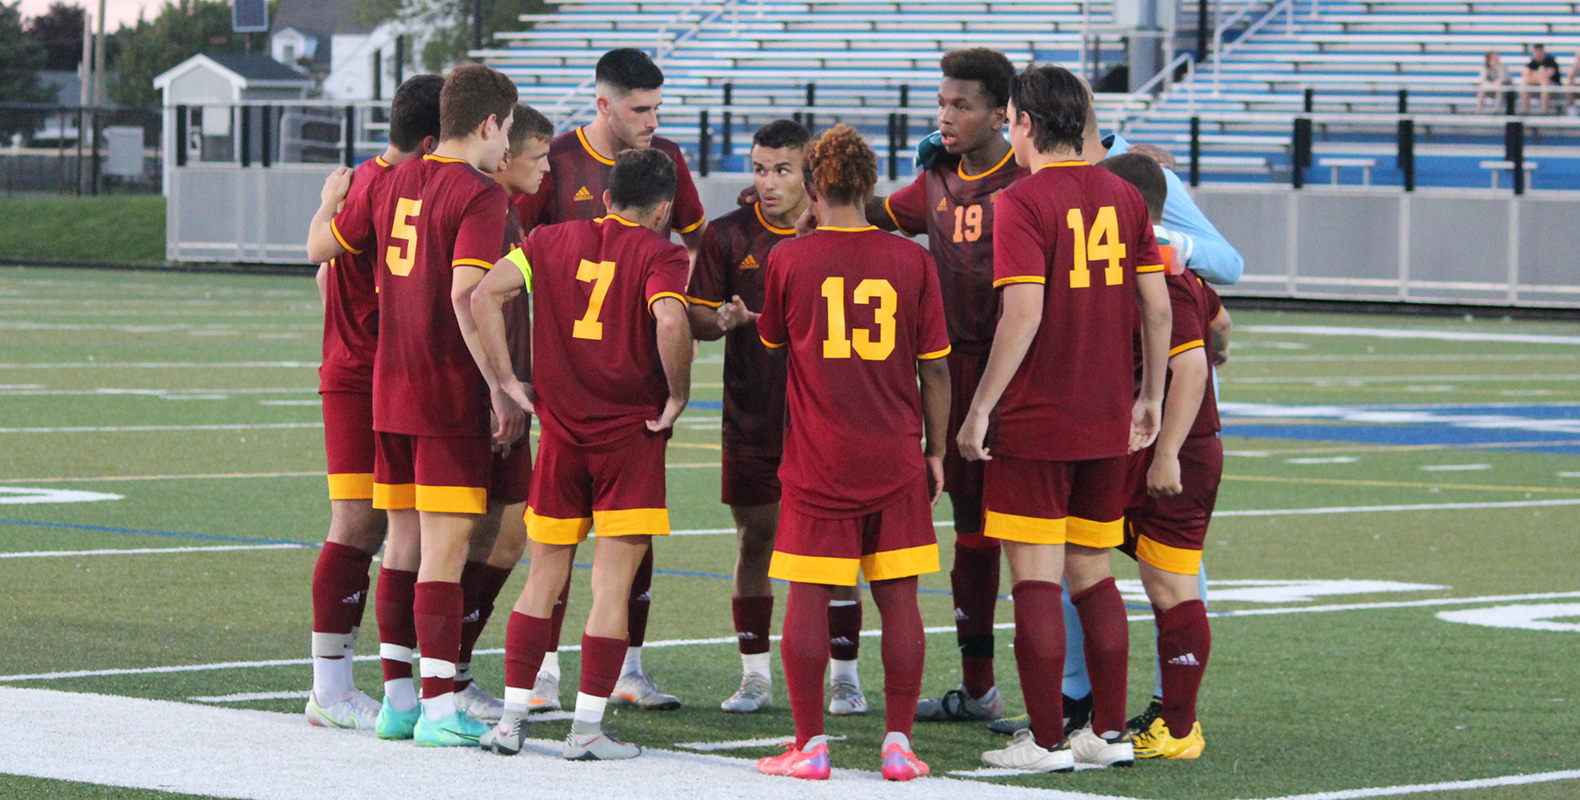 Men’s Soccer Remains Unbeaten in 2021 with League Win